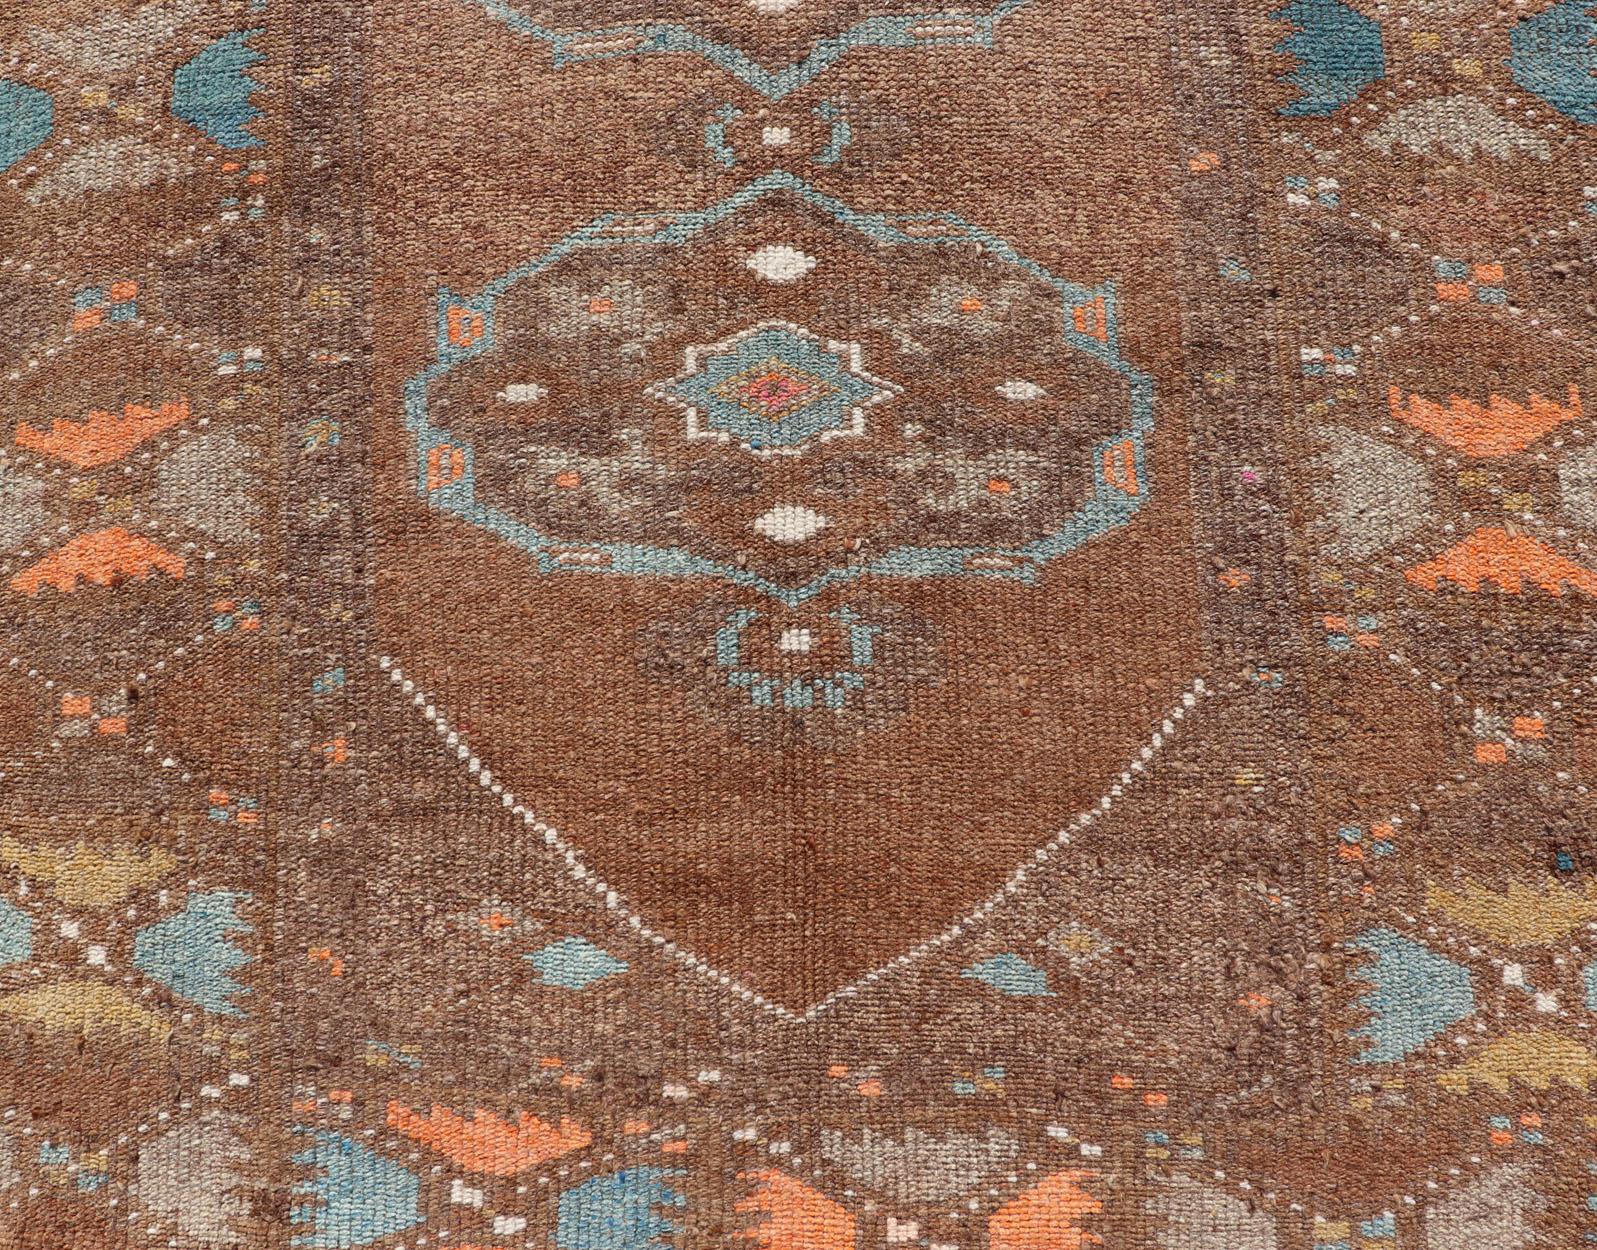 Vintage Turkish Kars runner in brown color, tan, taupe and soft orange. Keivan Woven Arts / rug EN-P13239, country of origin / type: Turkey / Kilim, circa Mid-20th Century.

This vintage runner features an assortment of tribal and geometric